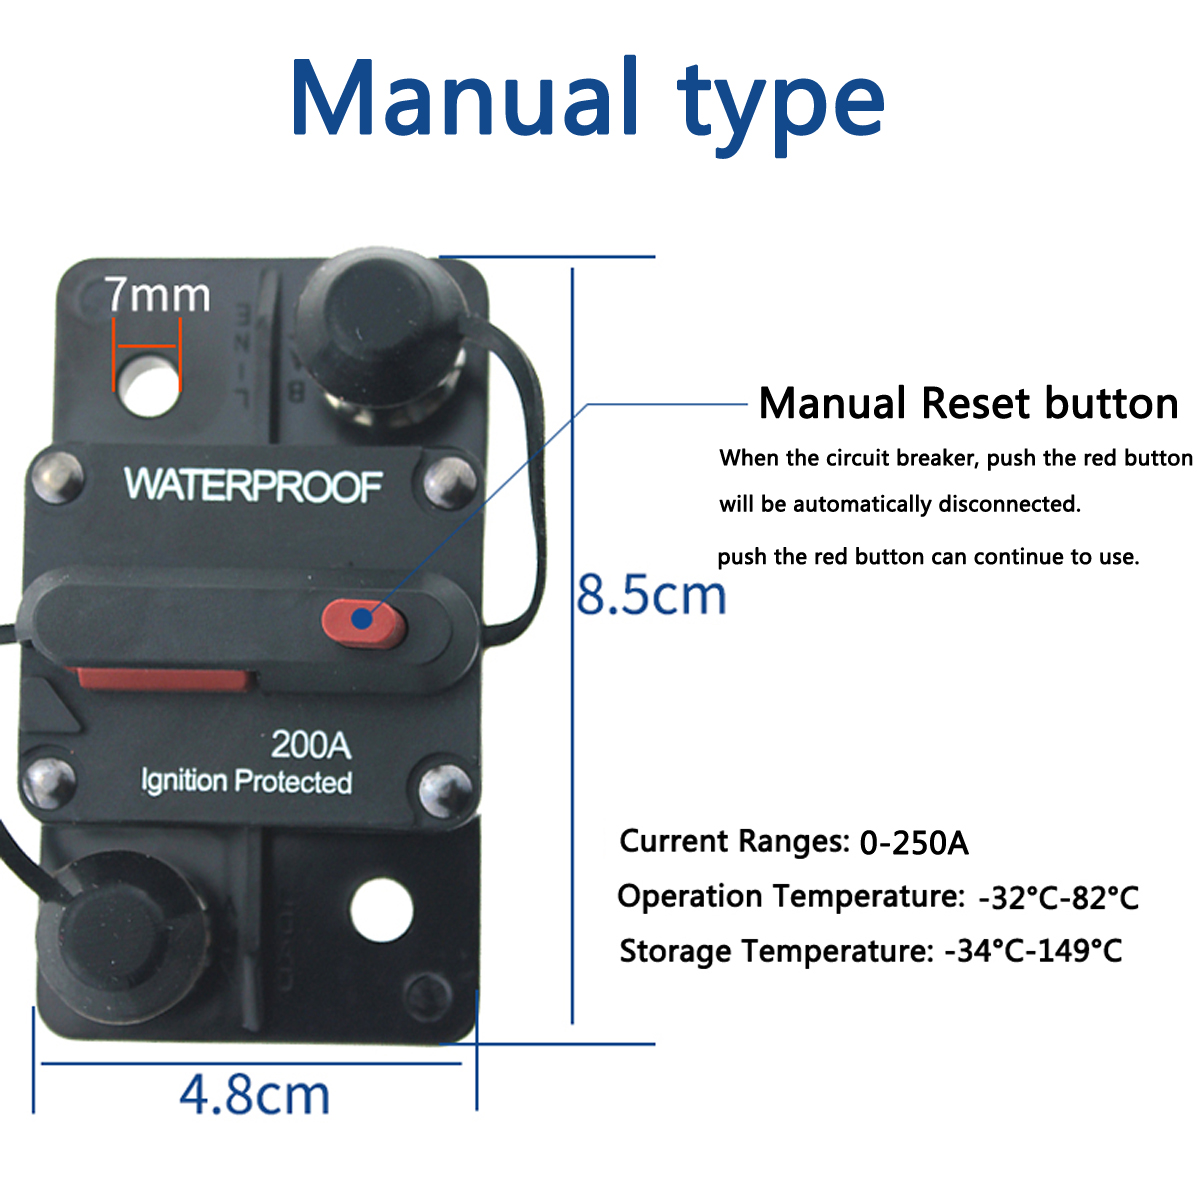 Photo-Top 40 Amp 48VDC,Surface-Mount & Waterproof Circuit Breakers with Manual Reset for Auto Boat Marine 12V 